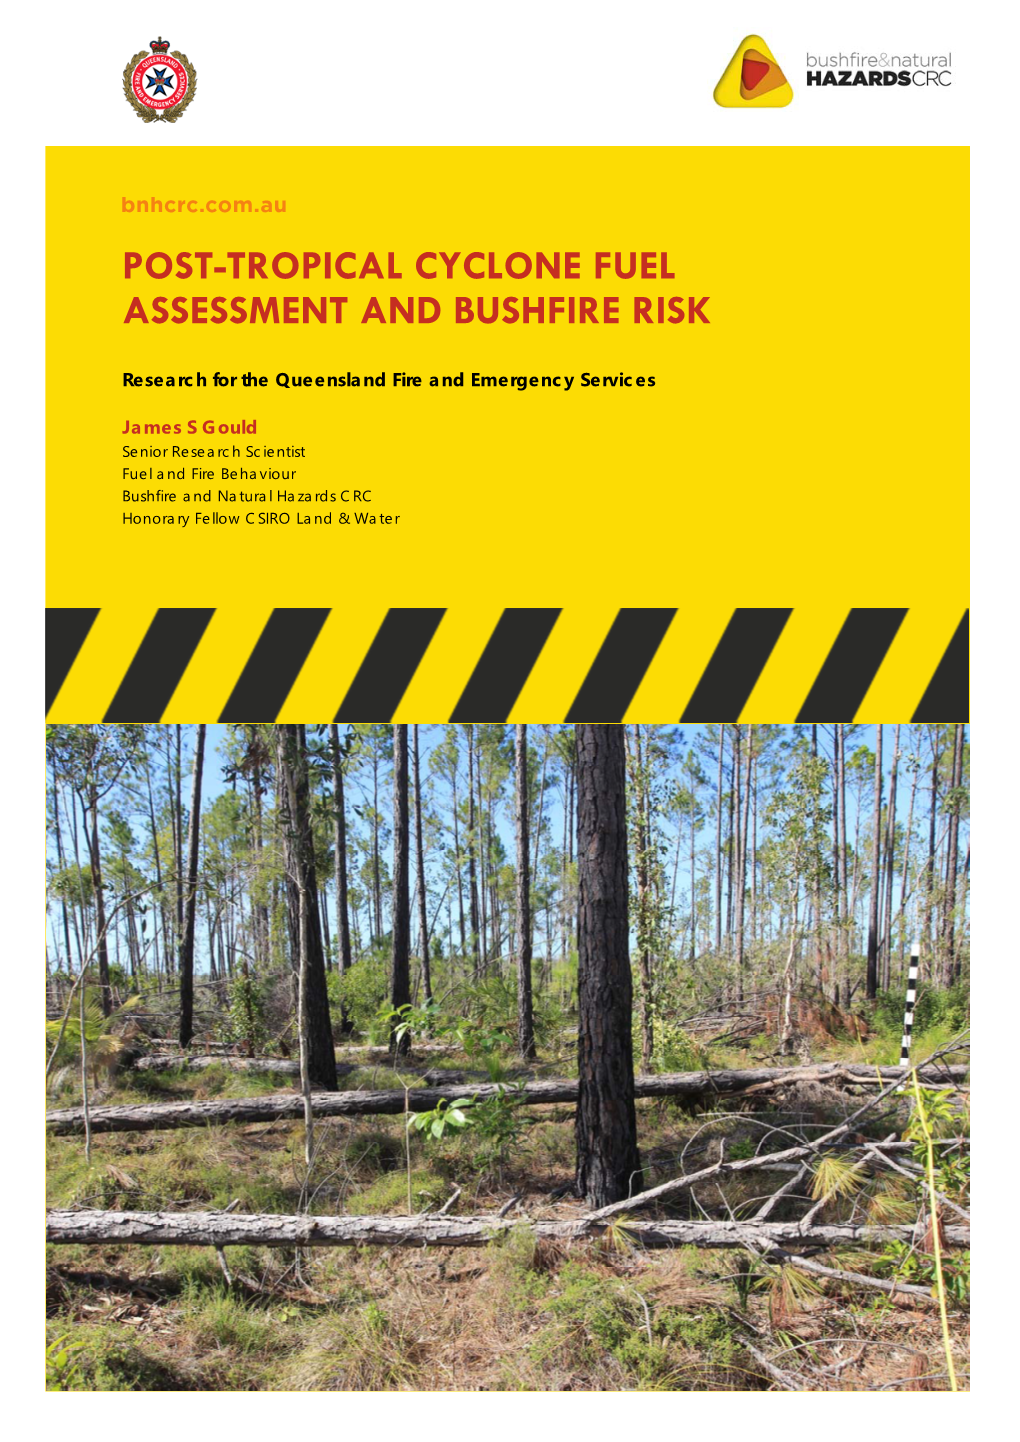 Post-Tropical Cyclone Fuel Assessment and Bushfire Risk